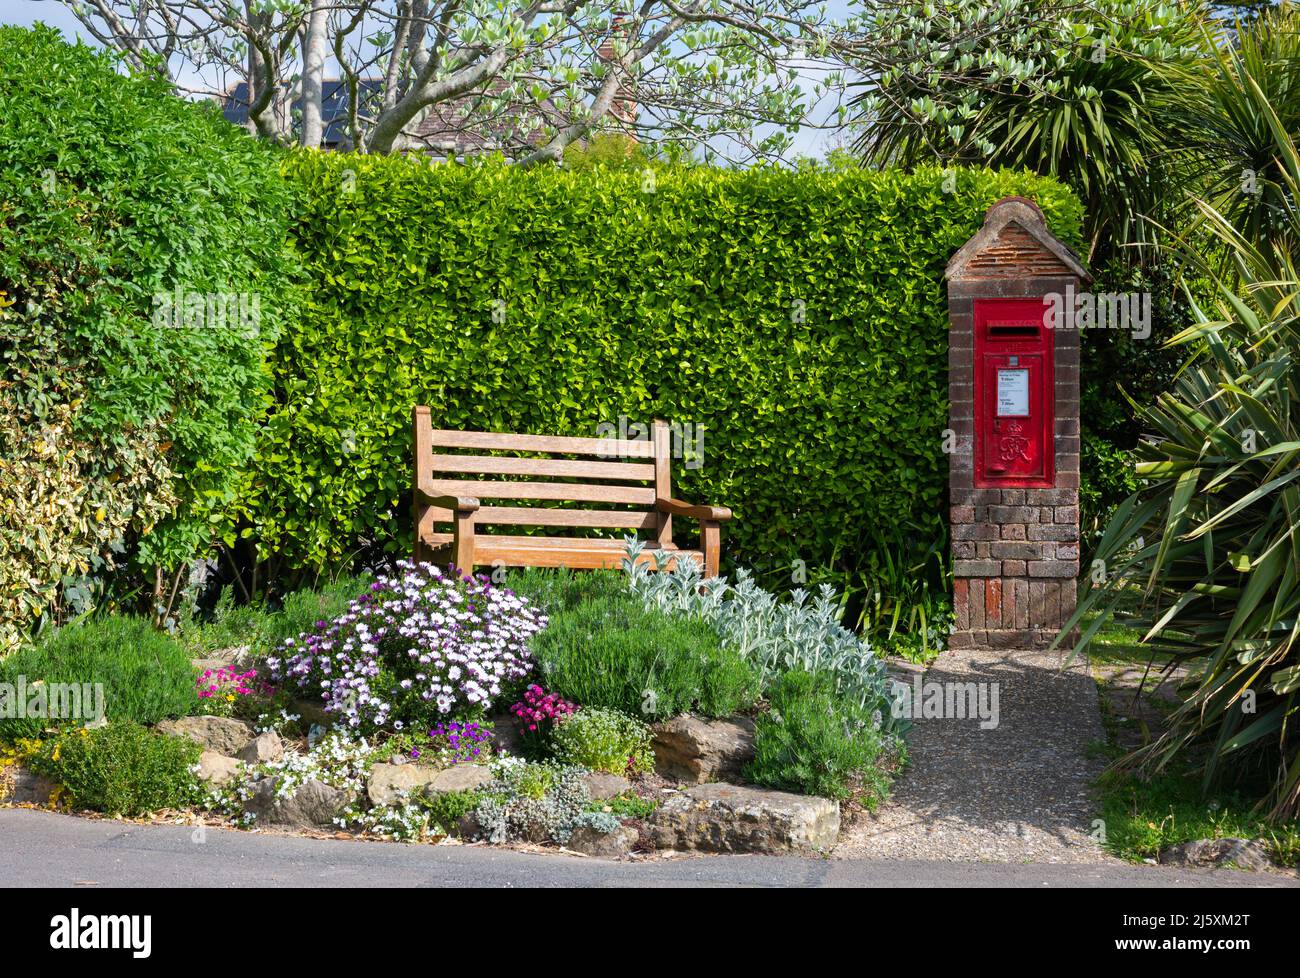 Rectangular red Royal Mail post box or letter box installed in a brick pillar next to wooden bench as a nice please to sit in West Sussex, England, UK Stock Photo